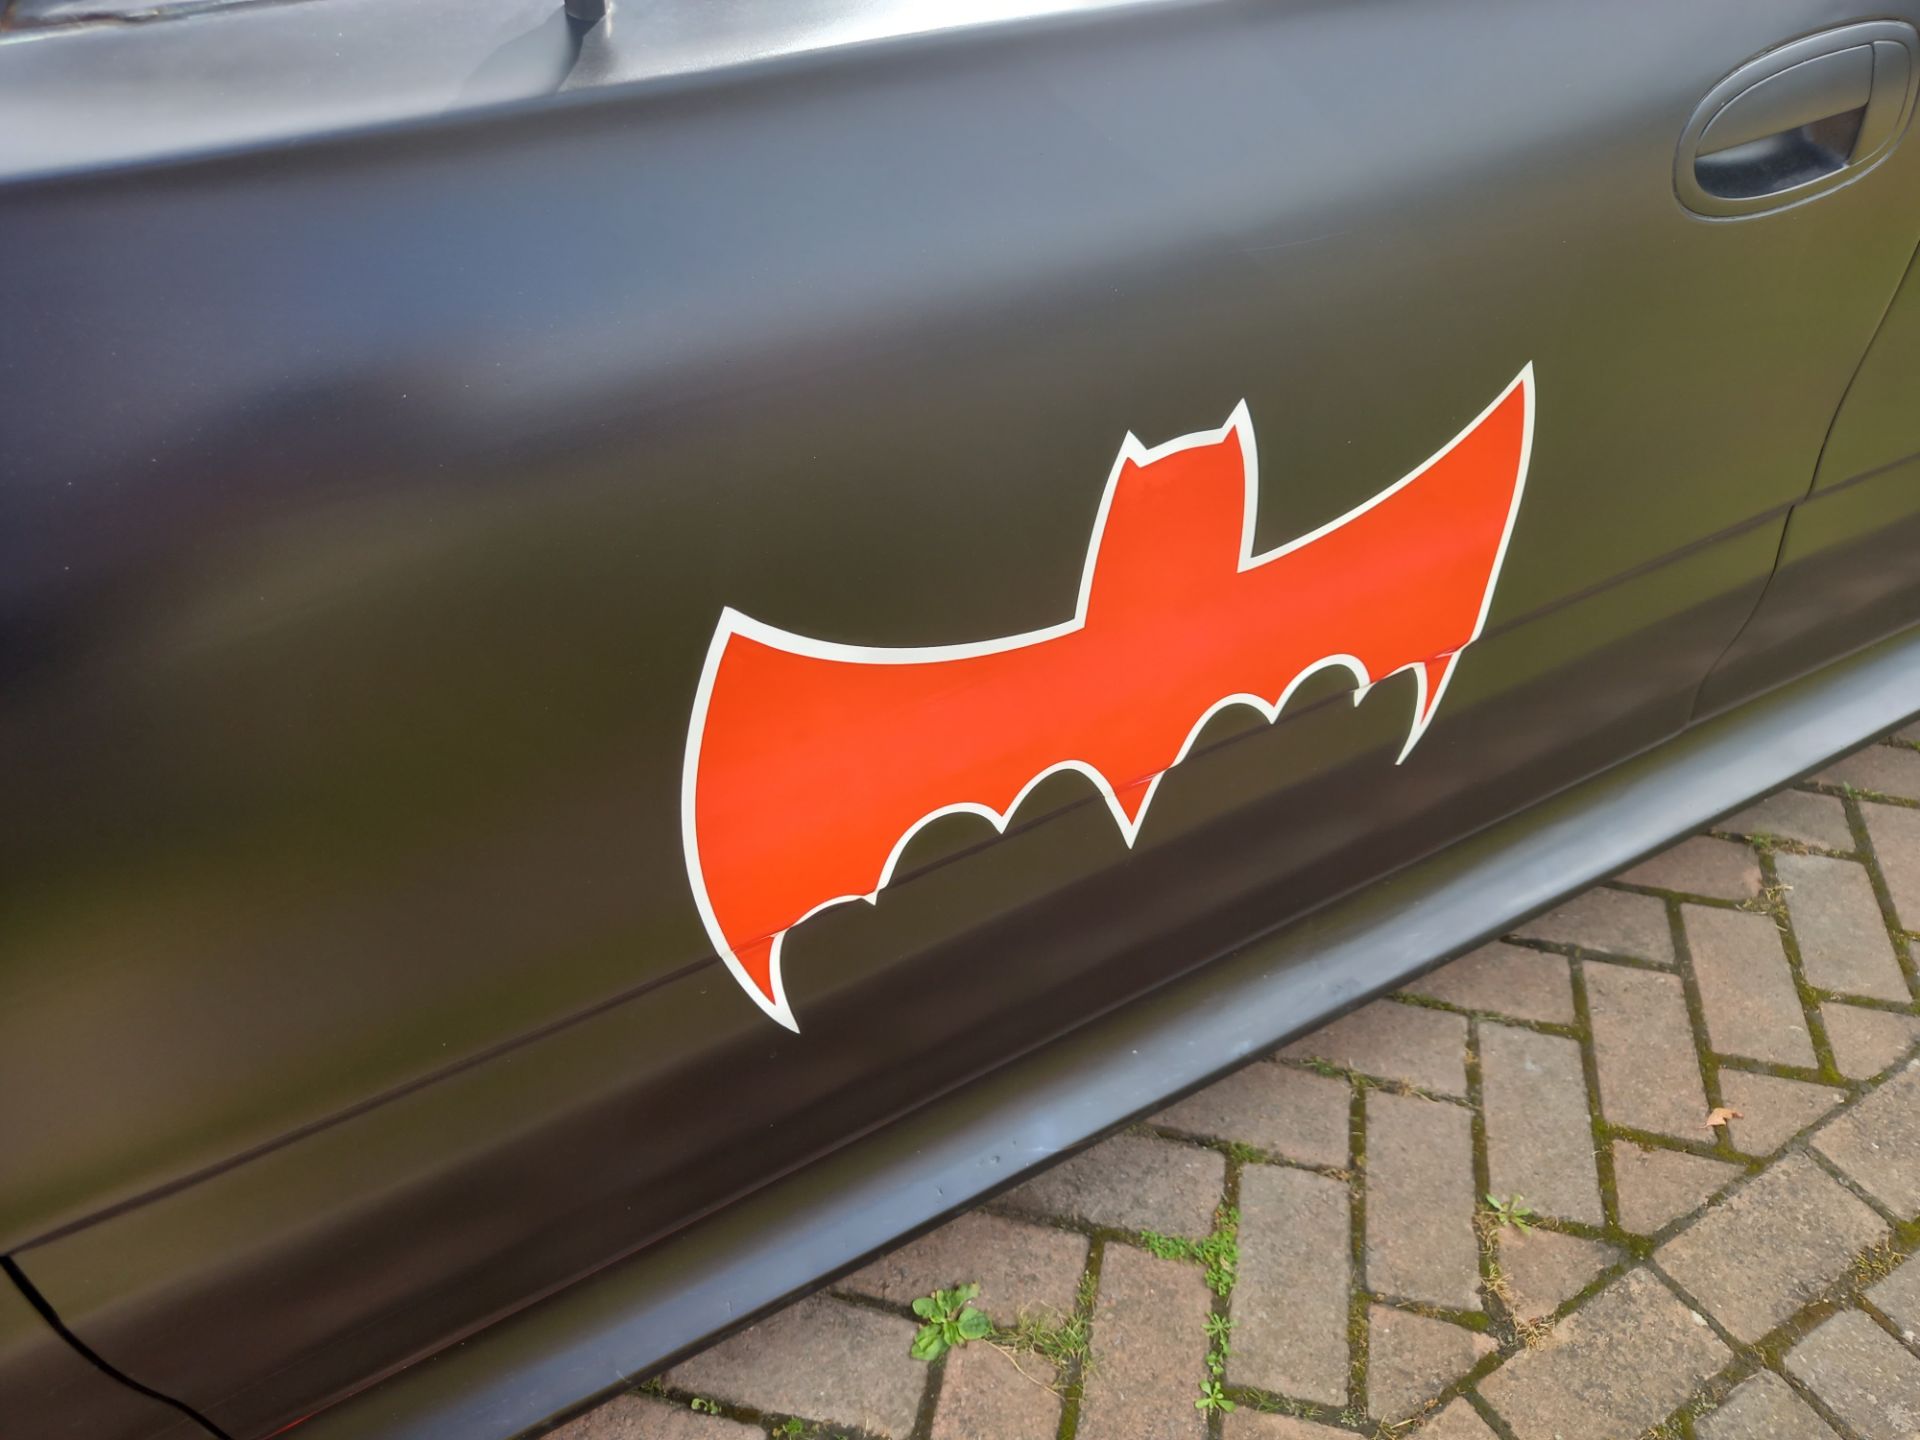 BATMOBILE - 2001 TOYOTA AVALON - WITH PRIVATE PLATE B14 TMO - Image 4 of 11